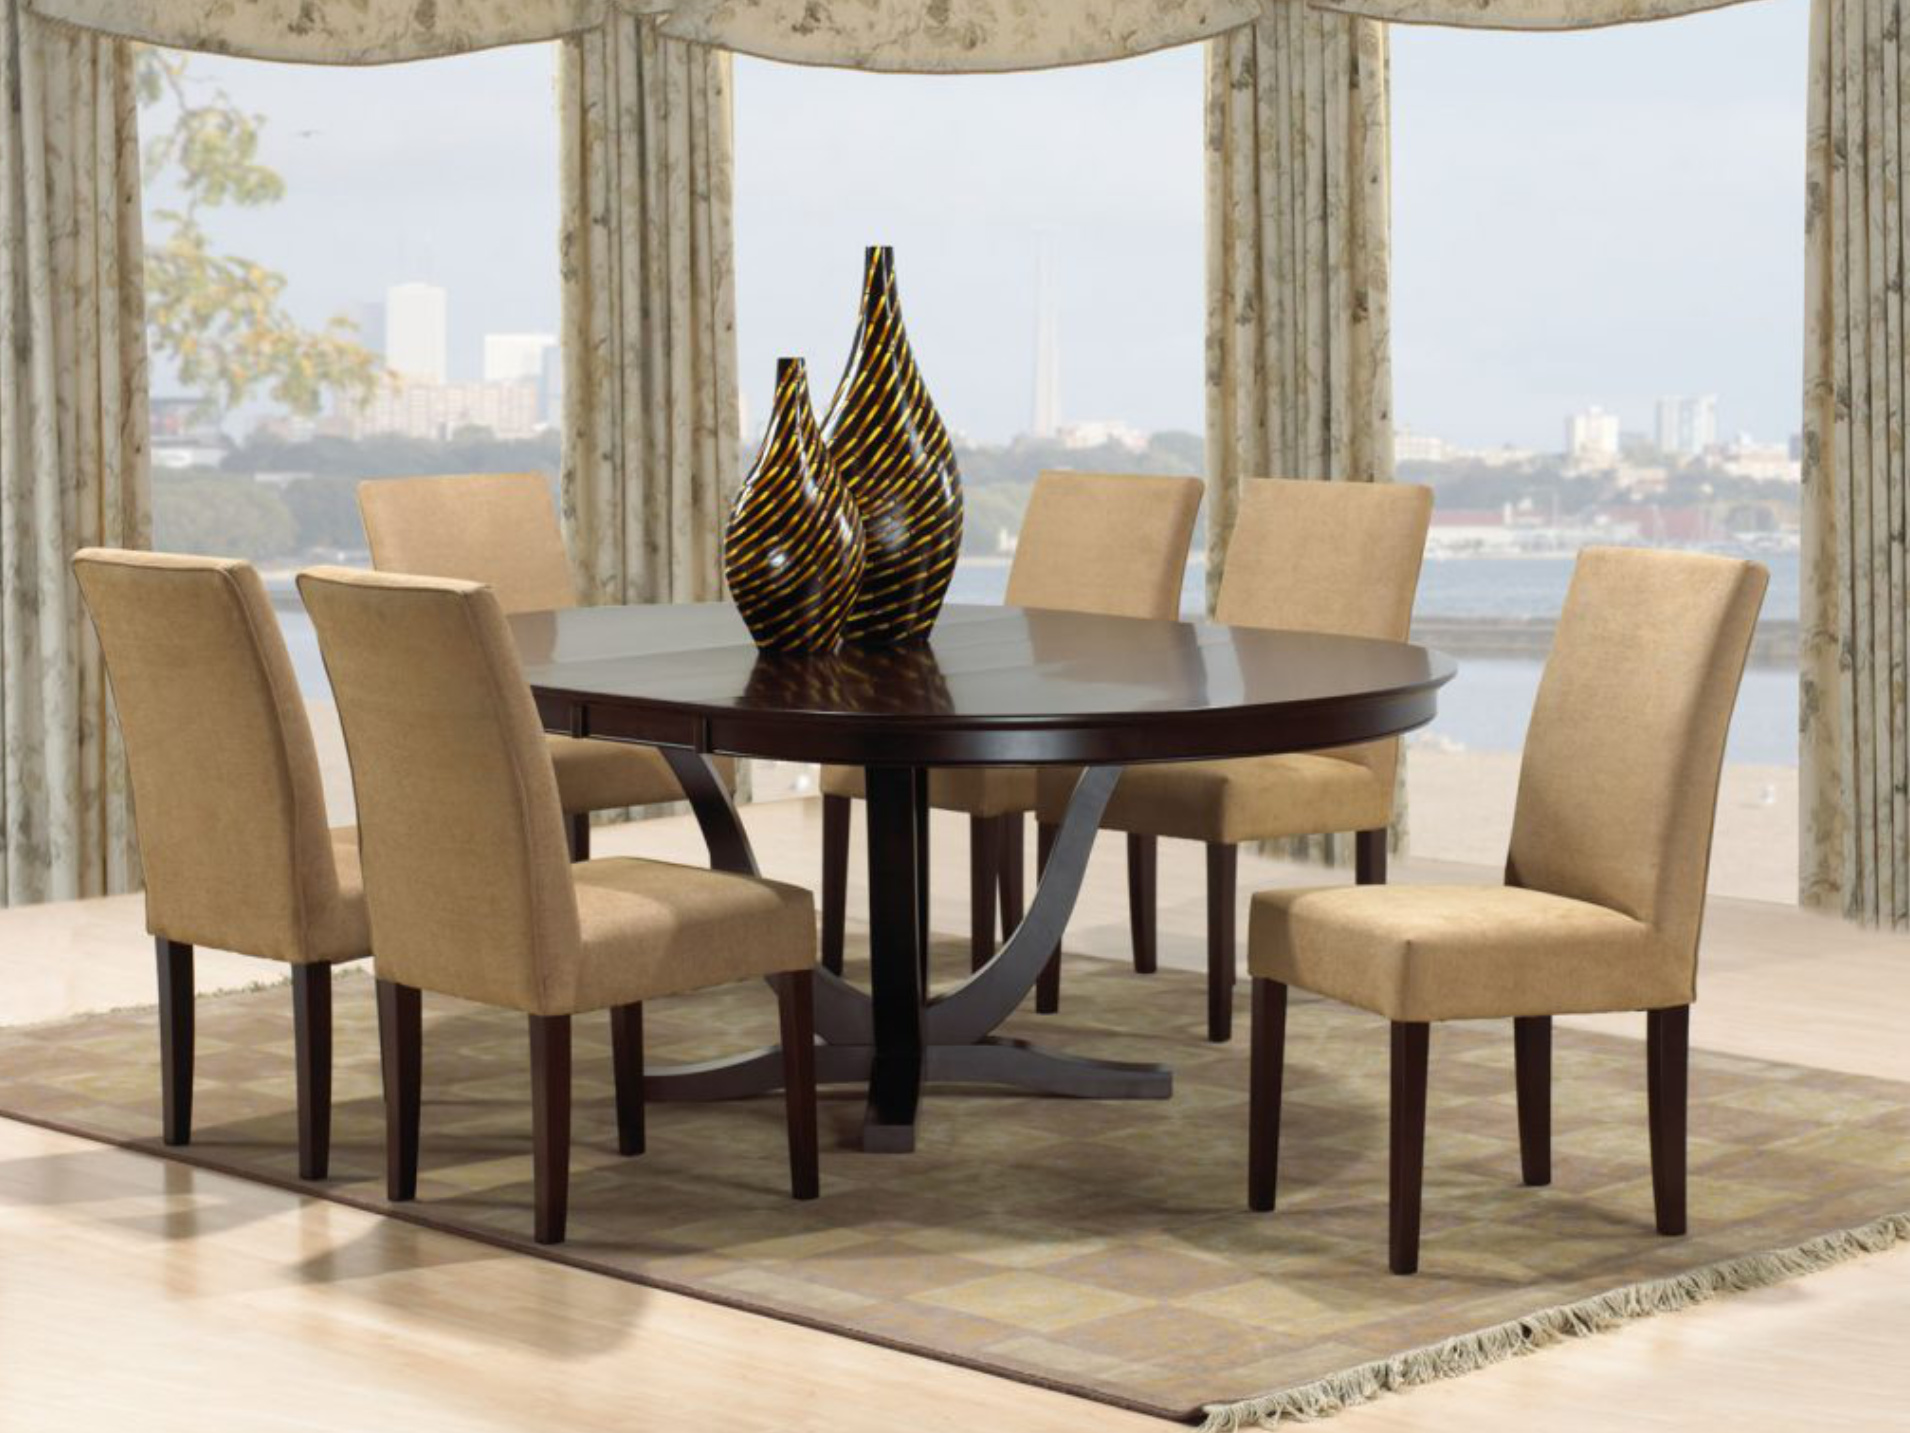 Grand Louvre Dining Room Collection_6